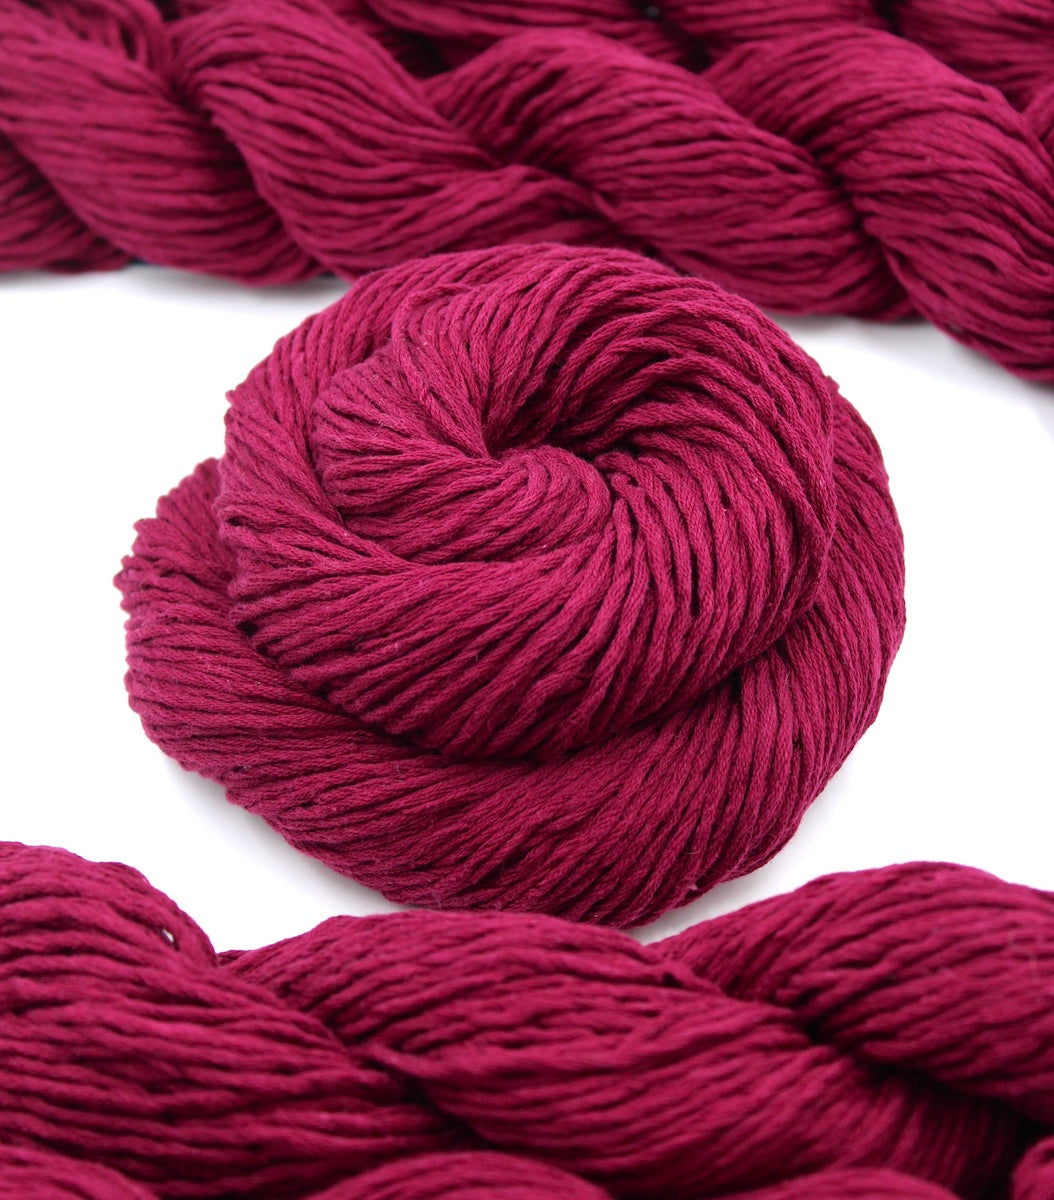 A skein of Vegan, Raspberry Red, 100% Cotton, Worsted weight Yarn recycled by hand from unwanted sweaters swirled attractively in the center of the frame. 